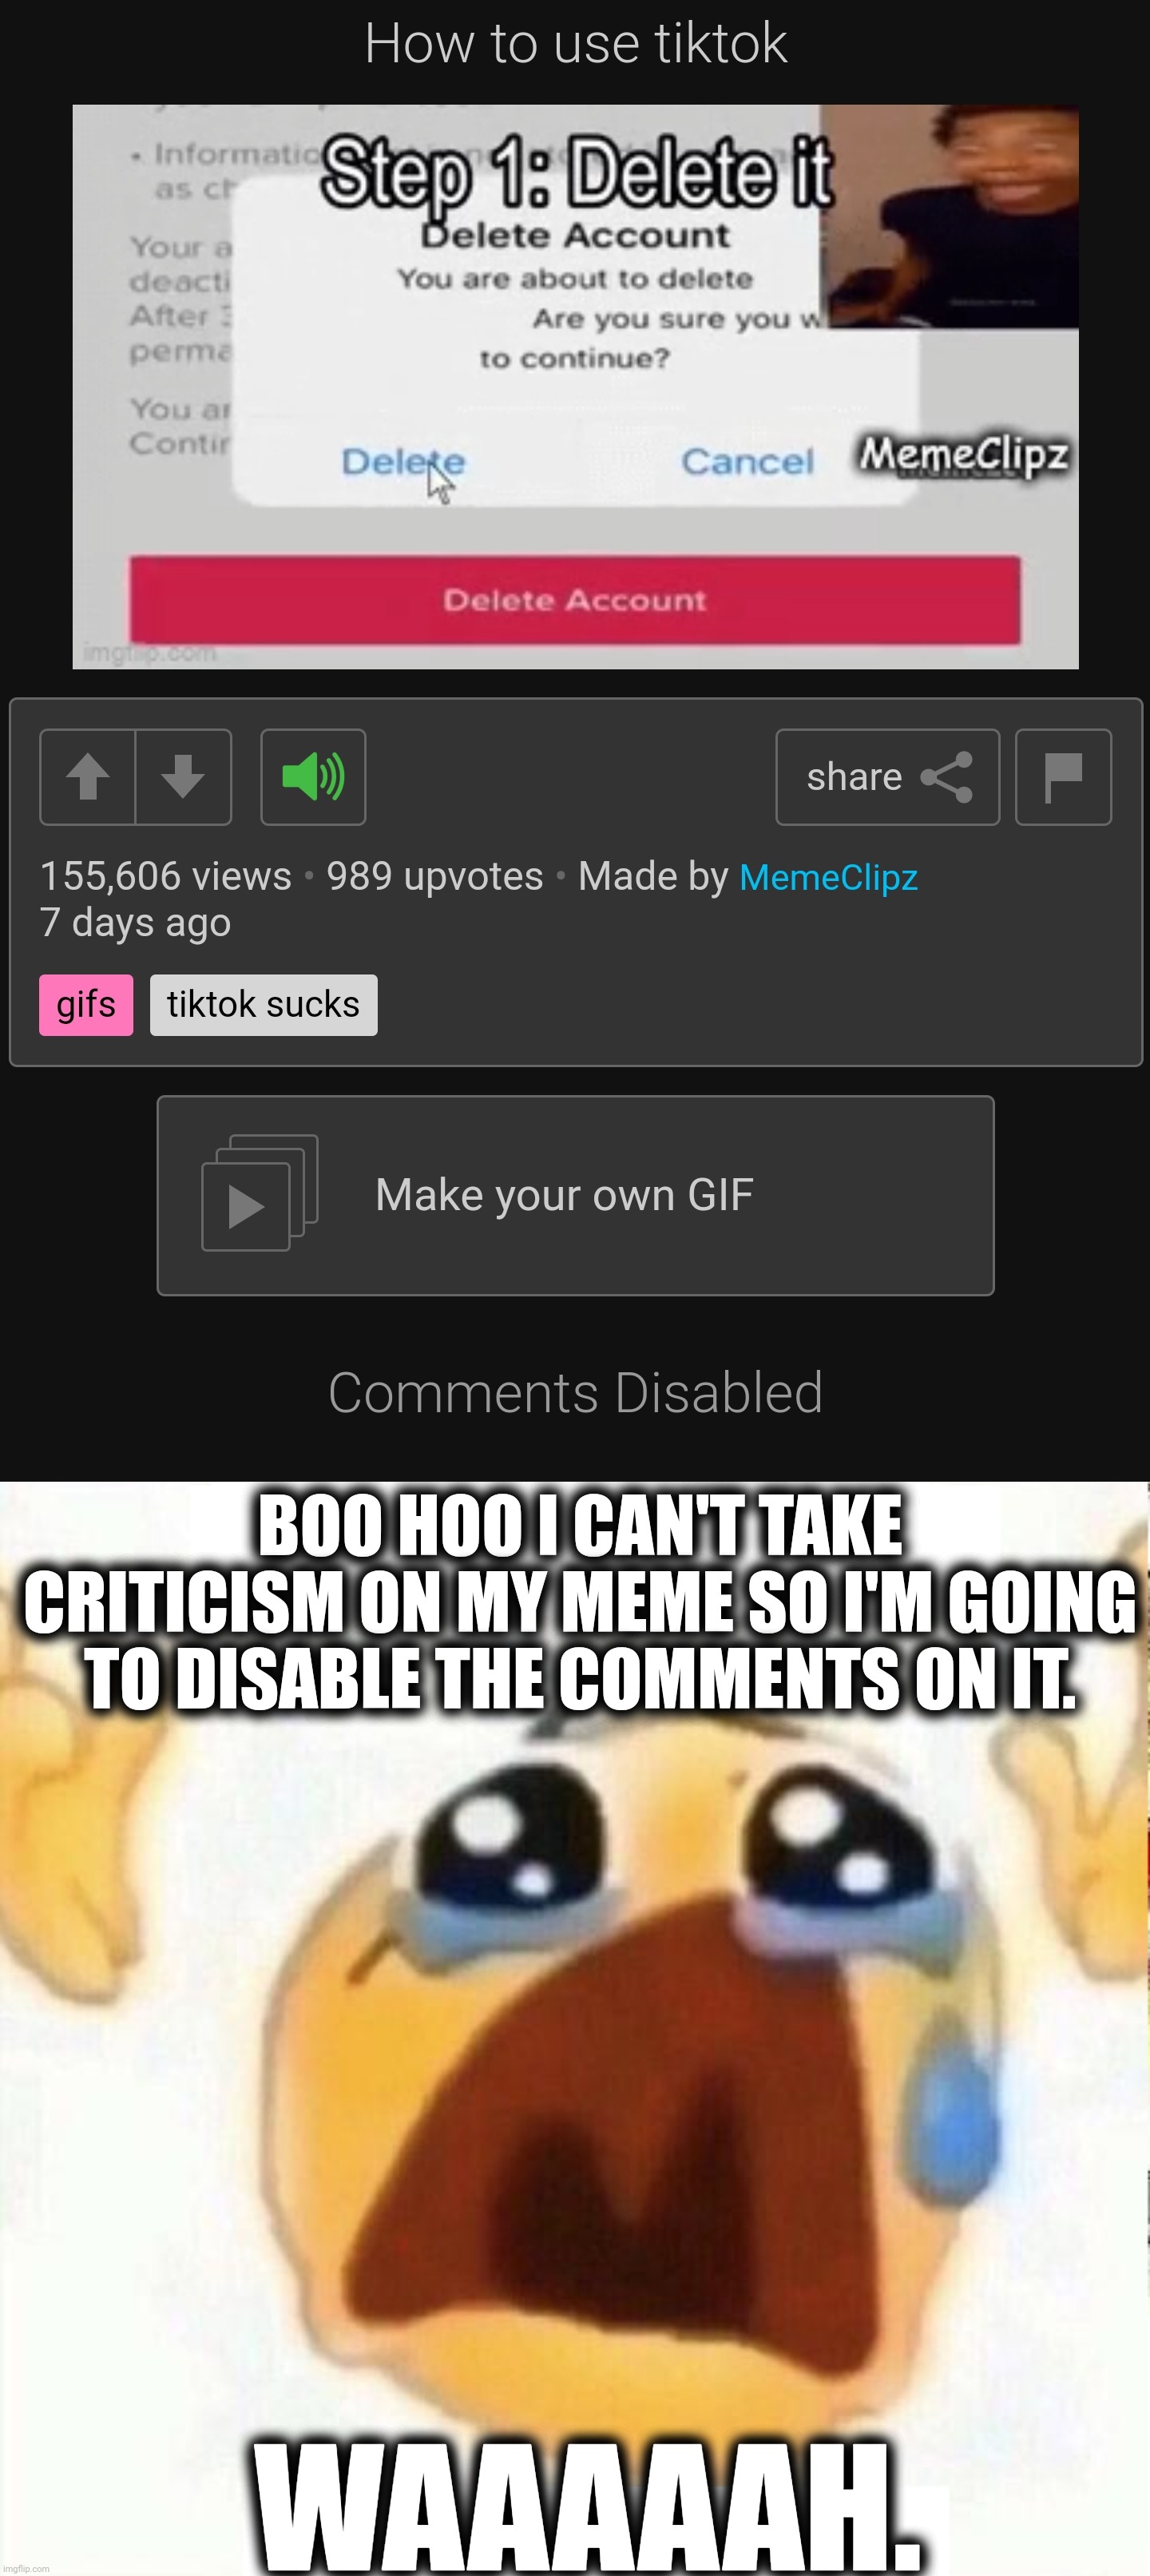 This is a joke and it's not intended to offend Windows6. | BOO HOO I CAN'T TAKE CRITICISM ON MY MEME SO I'M GOING TO DISABLE THE COMMENTS ON IT. WAAAAAH. | image tagged in boo hooo,memes,criticism,comments,joke | made w/ Imgflip meme maker